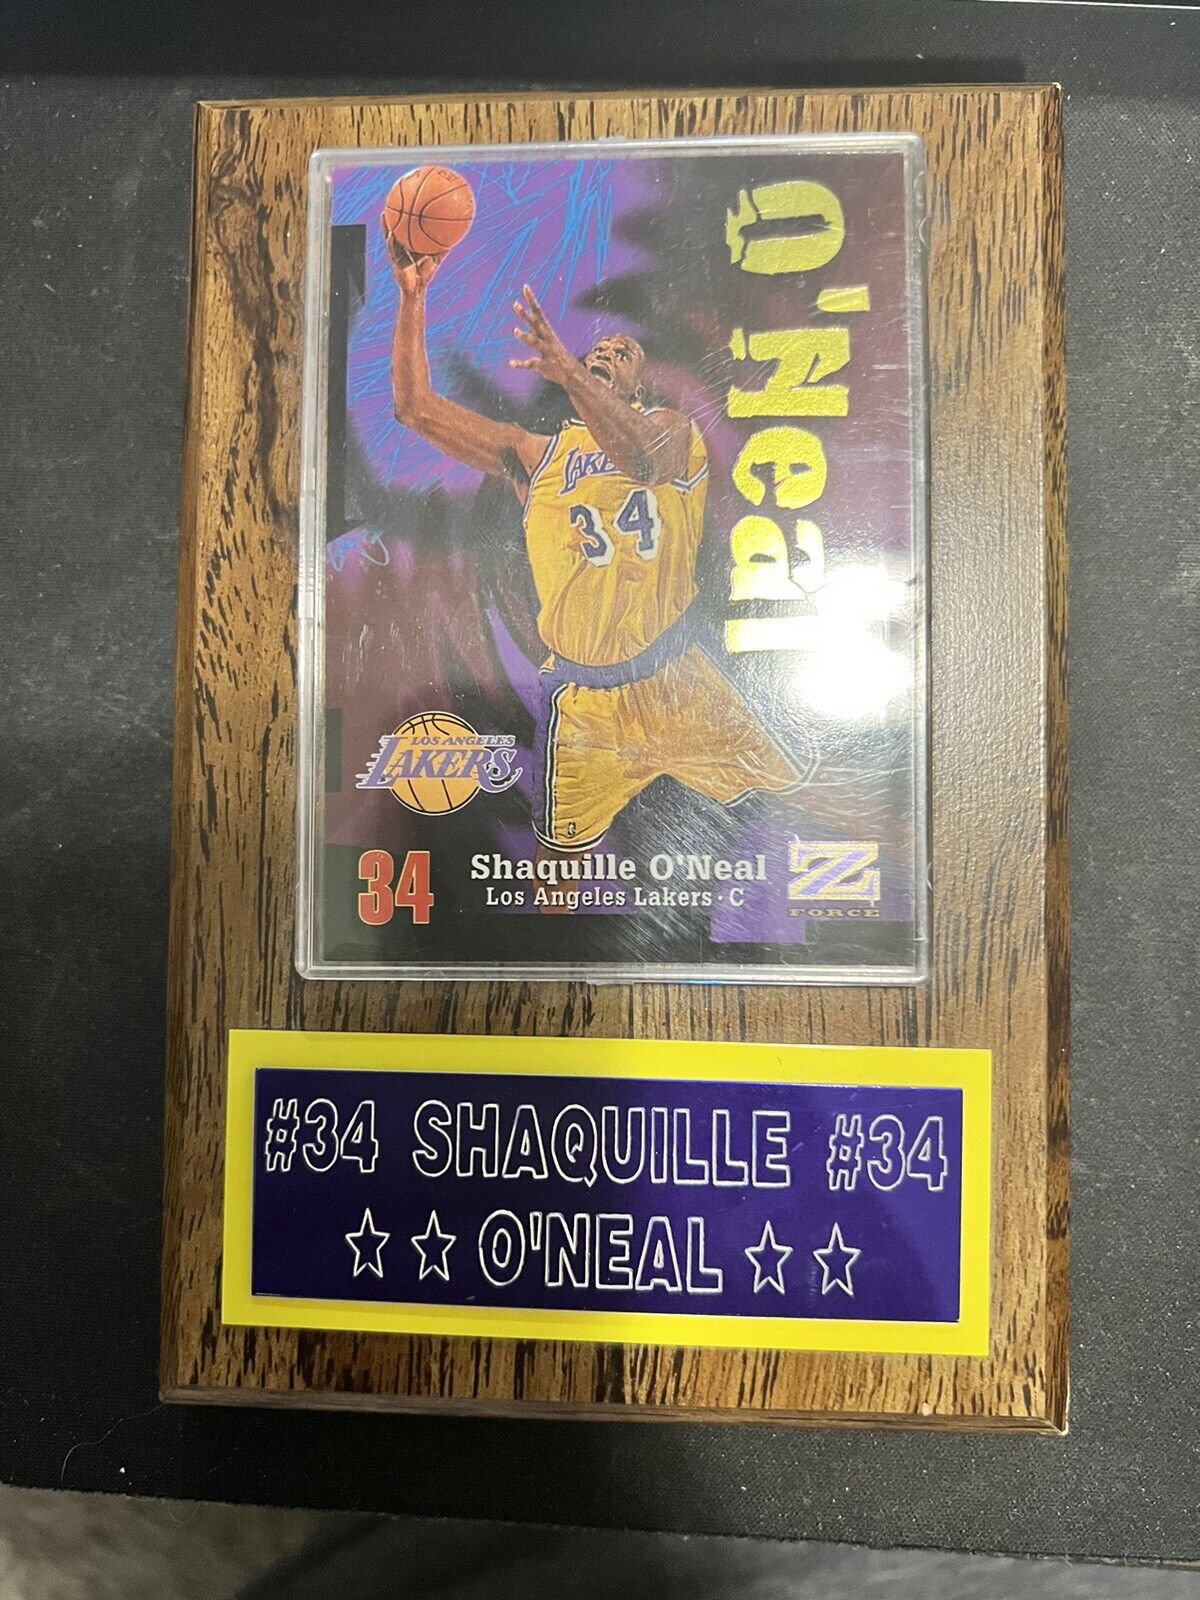 1997-1998 SkyBox Z-Force Shaquille O’Neal card mounted on a wood plaque